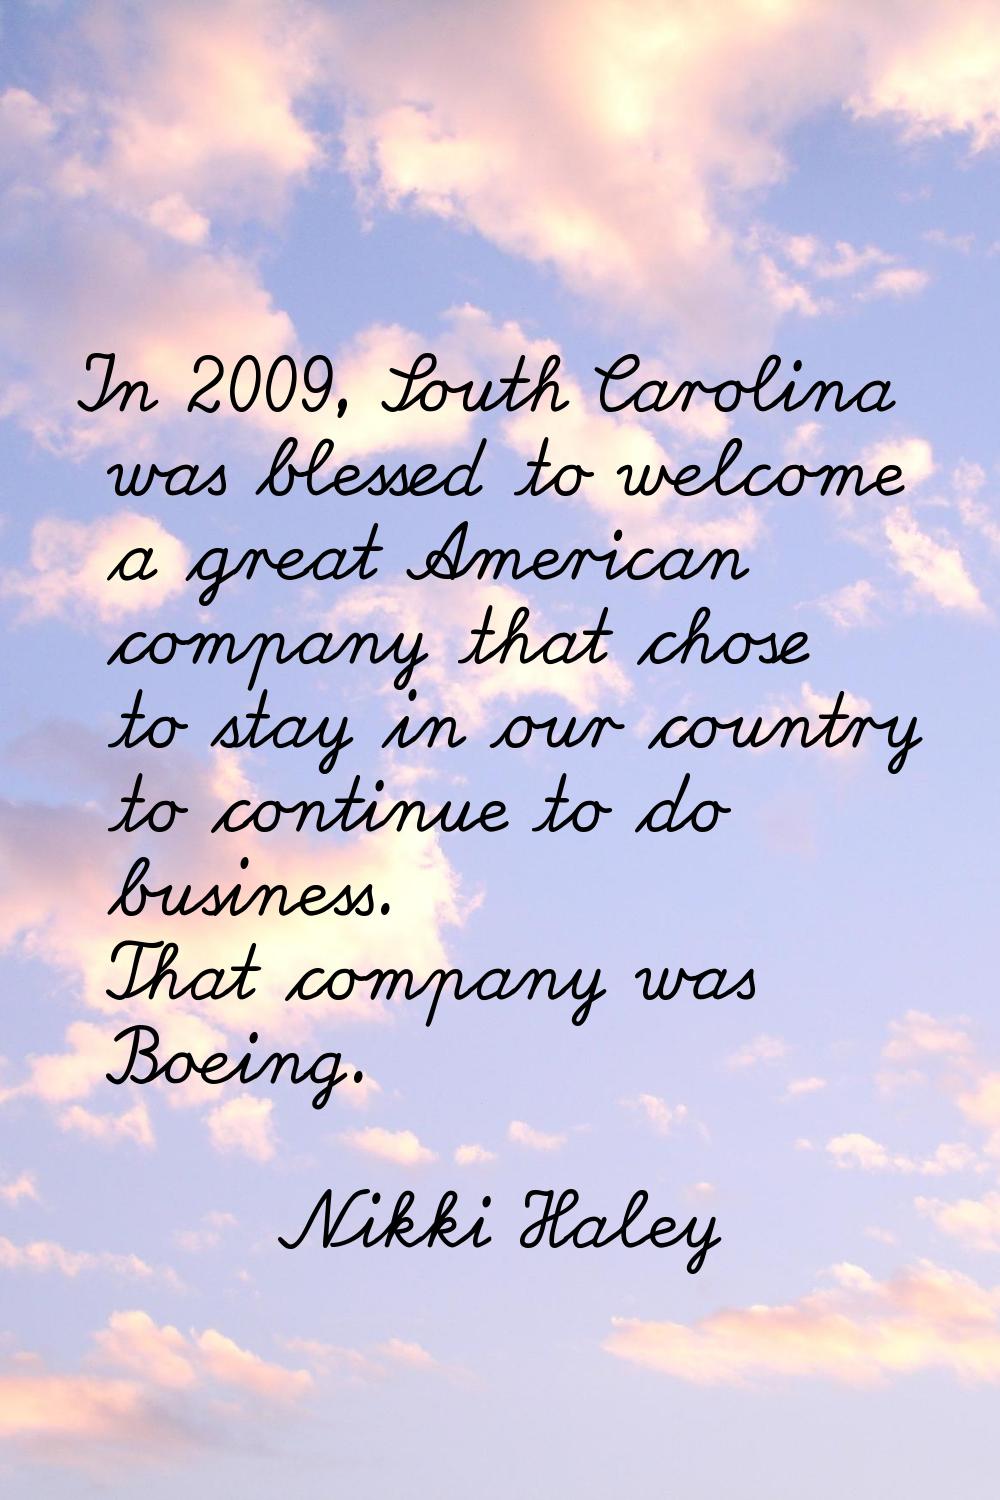 In 2009, South Carolina was blessed to welcome a great American company that chose to stay in our c